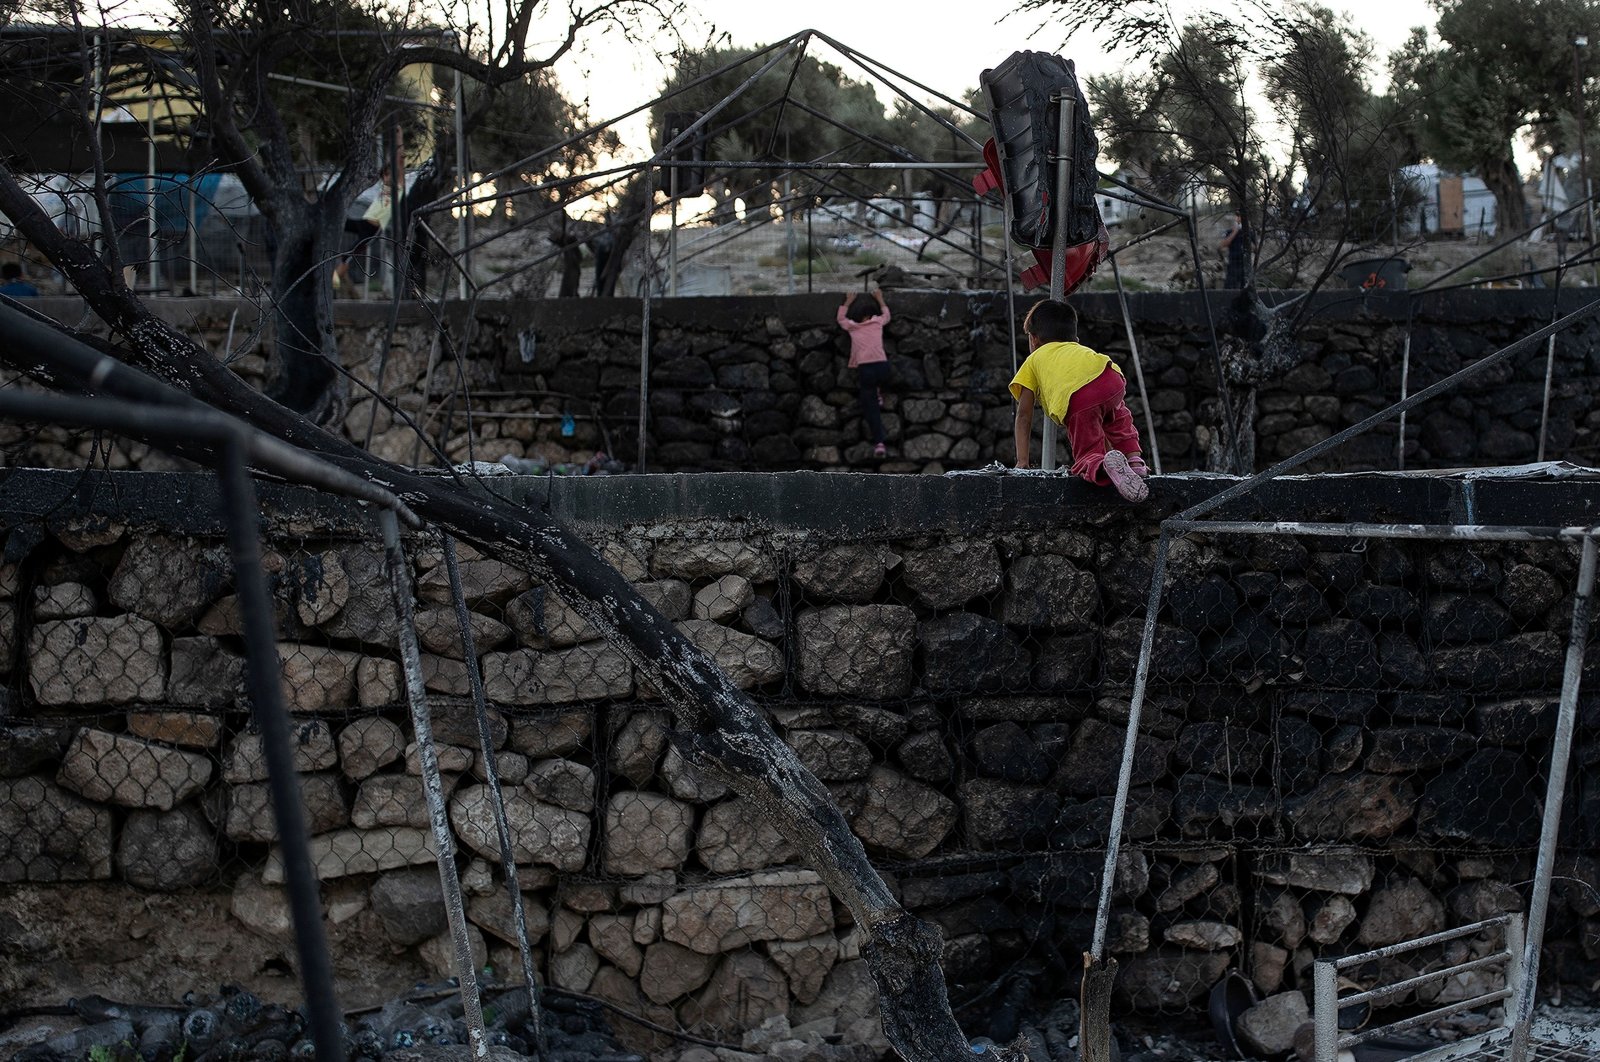 Children climb walls among burnt tents at the destroyed Moria camp for refugees and migrants, on the island of Lesbos, Greece, Sept. 14, 2020. (Reuters Photo)